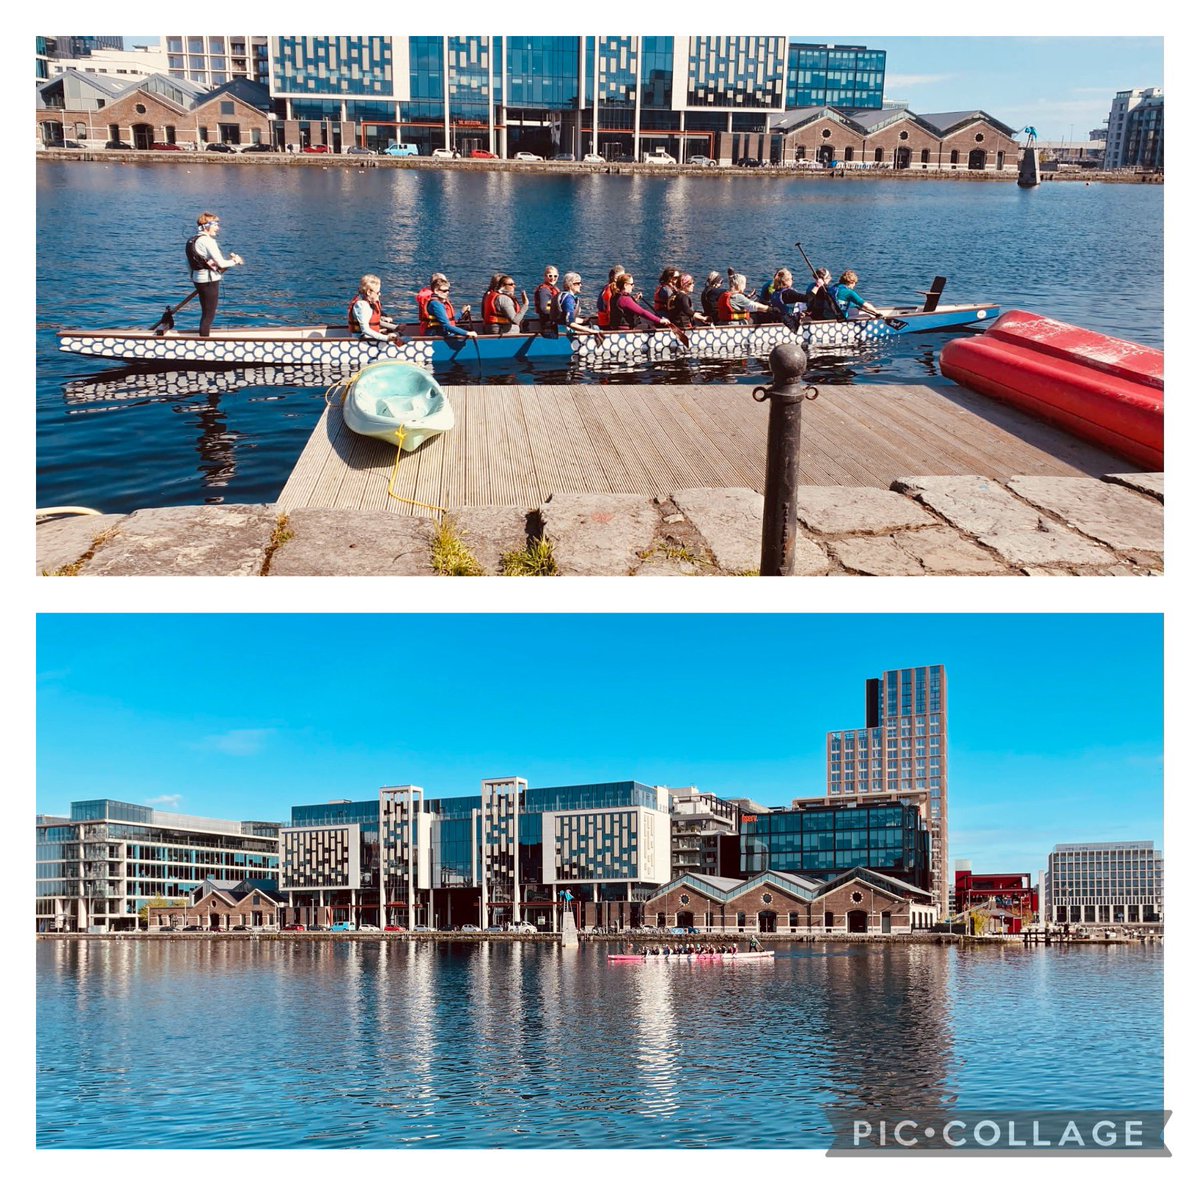 The “Plurabelle Paddlers” are Irelands first breast cancer dragon boat club.🐉 Dragons symbolise power, good fortune, and strength. The Plurabelles embody these traits in spades! Dragon boating “empowers members to get fit and flexible, while having fun”! What’s not to love?